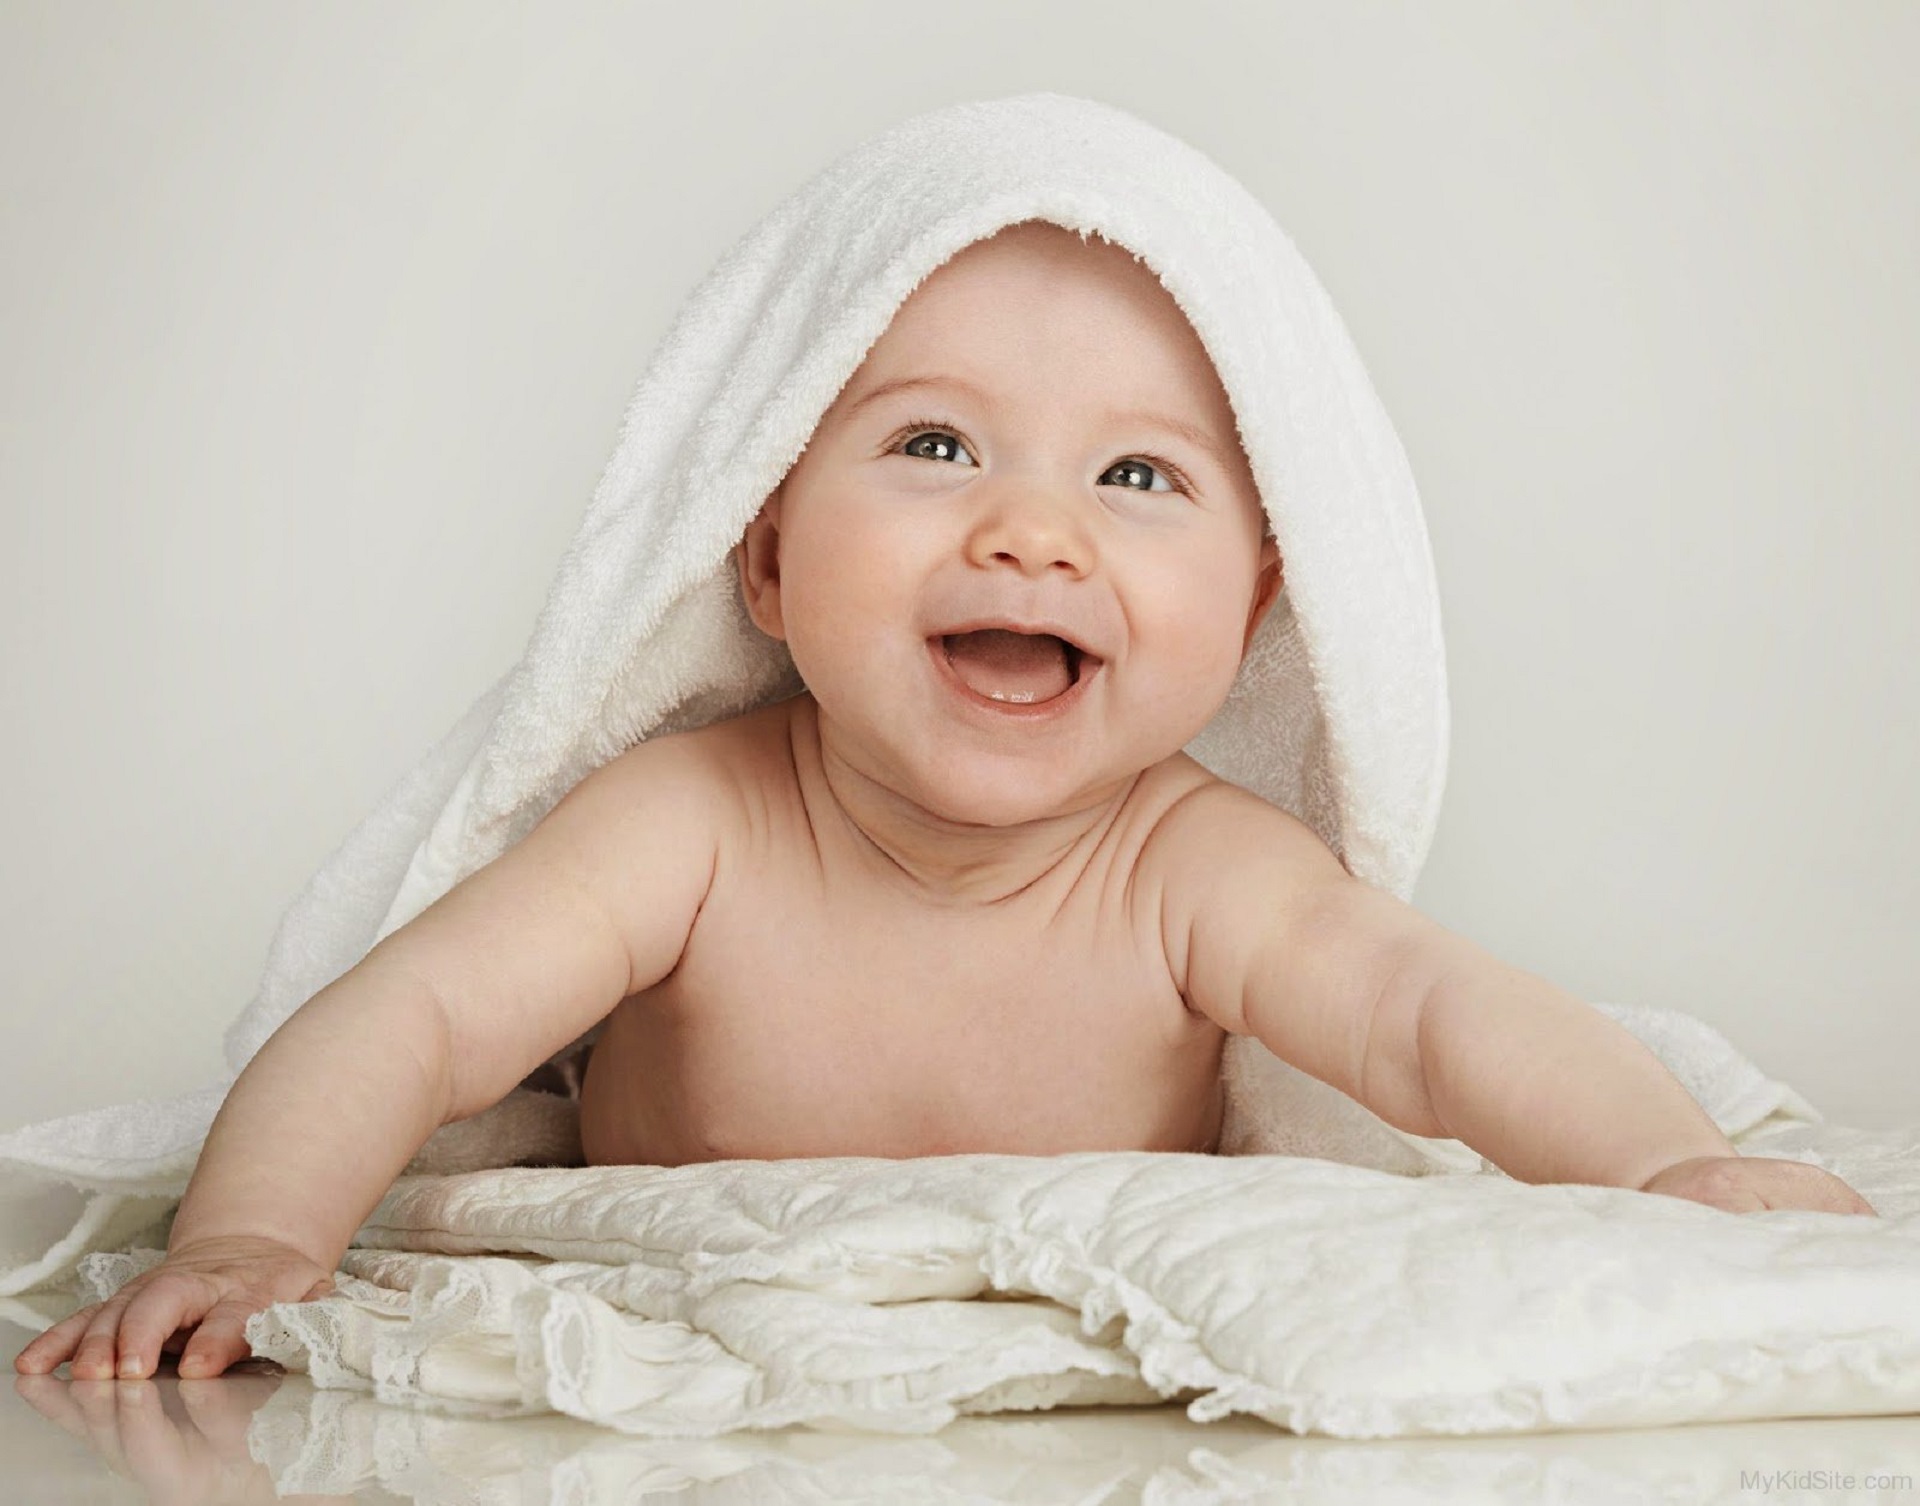 cute wallpaper for baby pictures